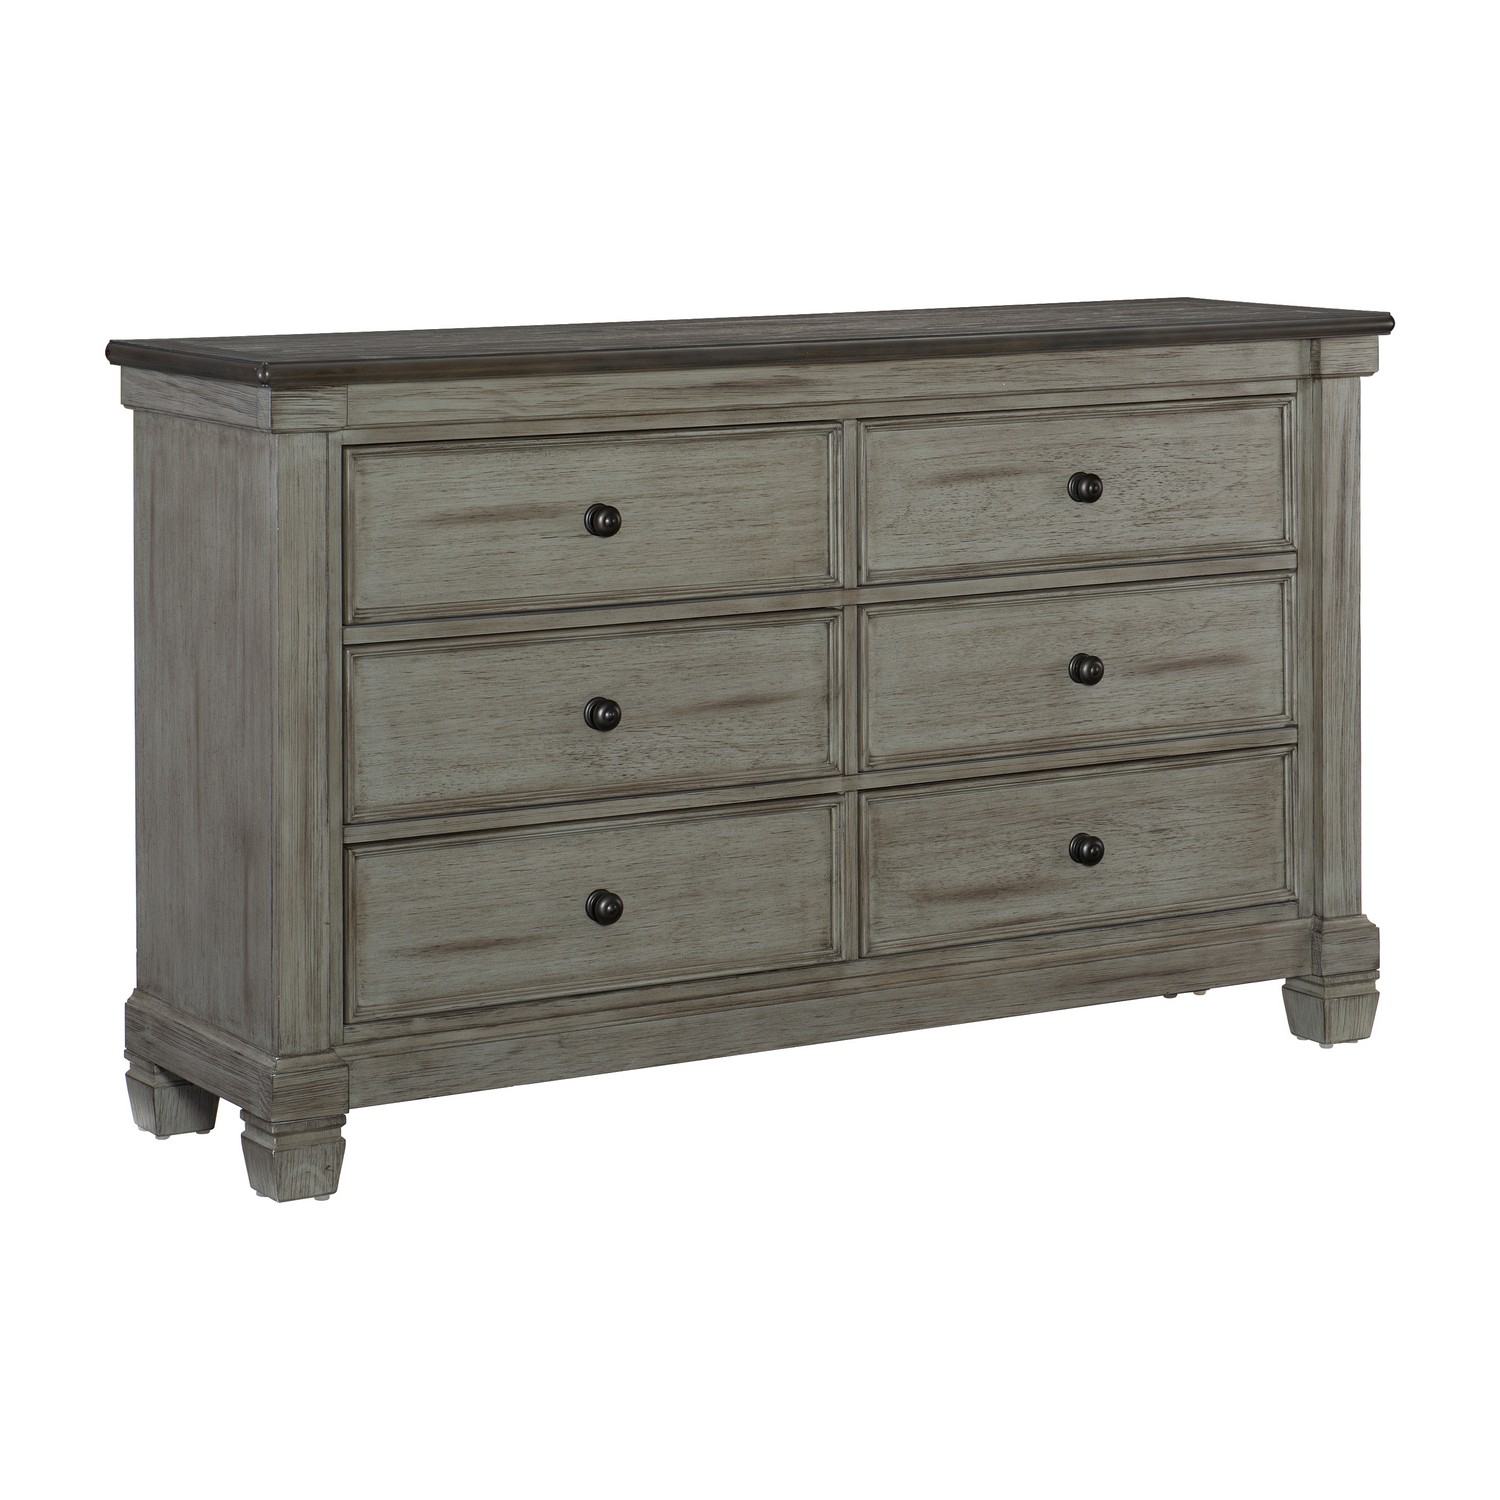 Homelegance Weaver Dresser - Two-tone : Antique Gray And Coffee